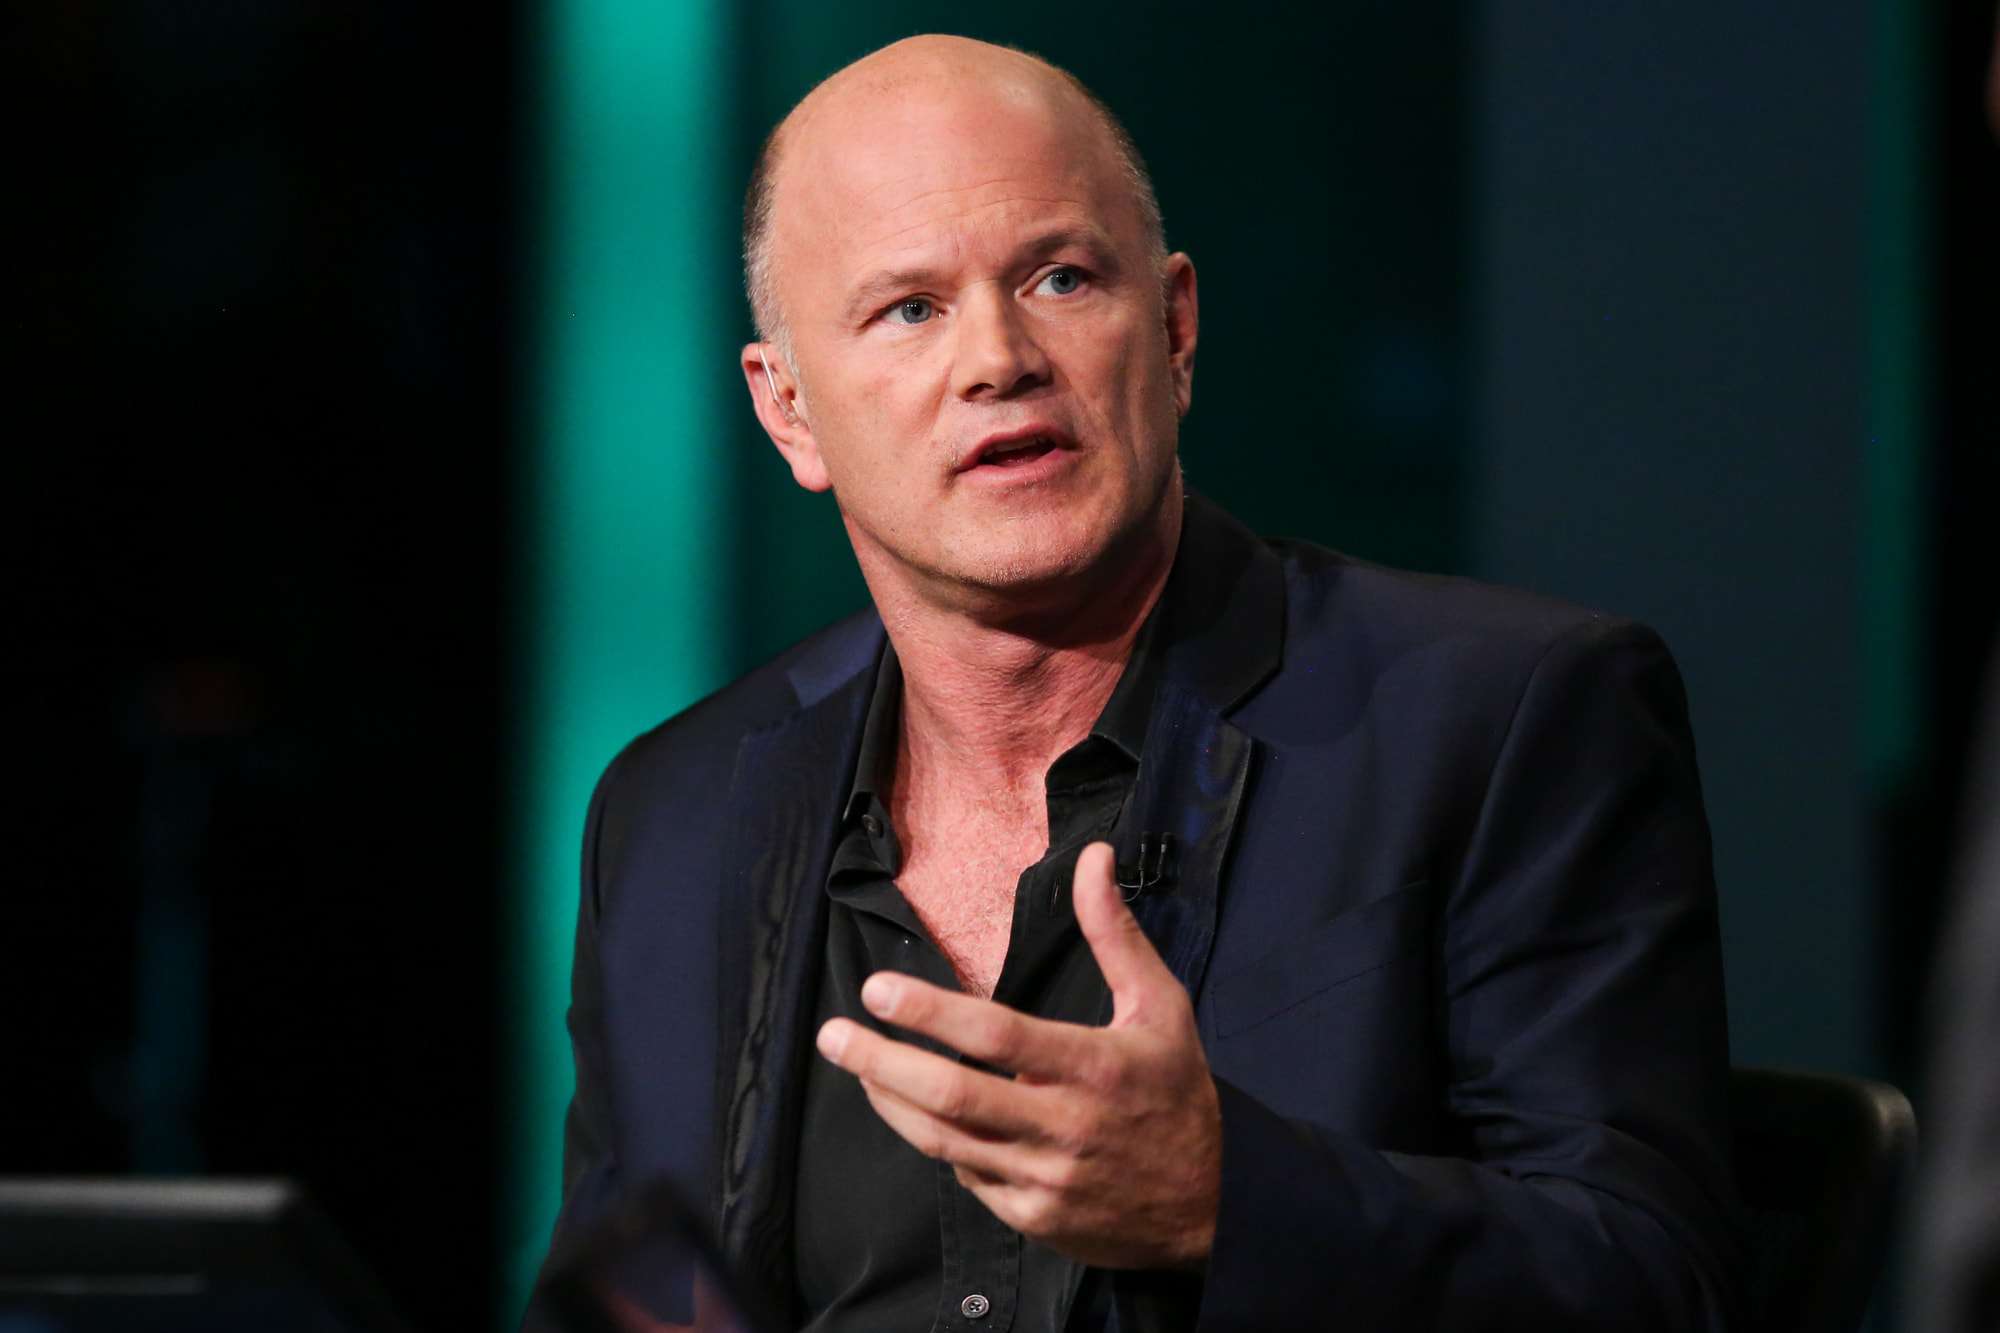 Novogratz: Bitcoin Price To Reach $20,000 As Fed Prints and Buys Too Many Dollars